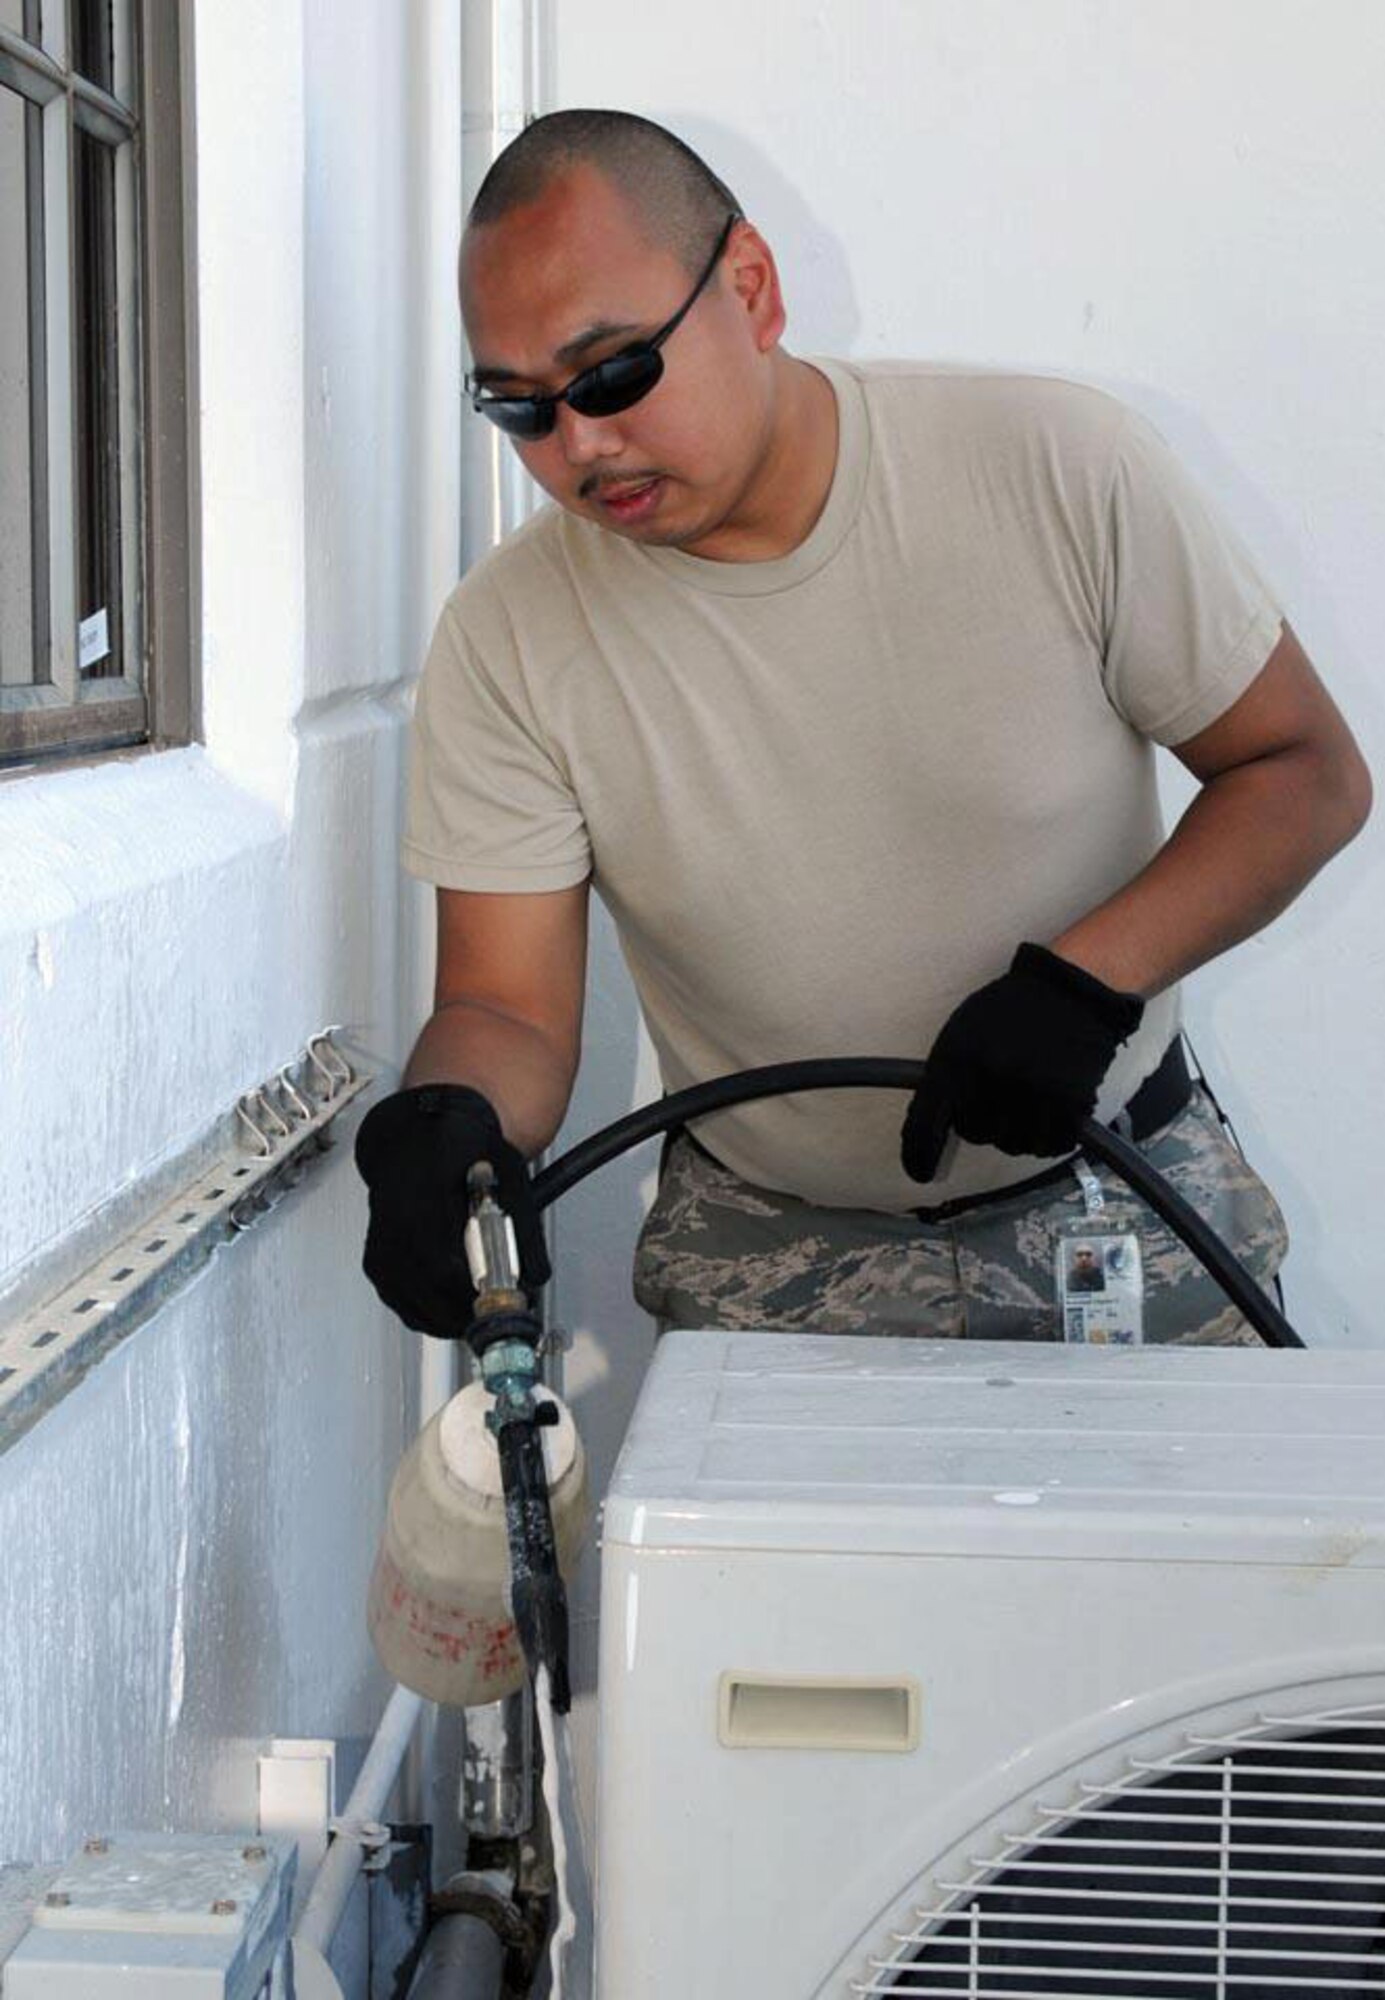 COAST GURAD AIR STATION BORINQUEN, Puerto Rico -- Senior Airman Cameron Mixsooke works on an air conditioning unit outside a Coast Guard hangar Feb. 9, 2010, during a Deployment For Training here with the 176 Civil Engineer Squadron. Mixsooke kept us skills fresh to be ready when called upon. National Guard photo by Capt. John Callahan.